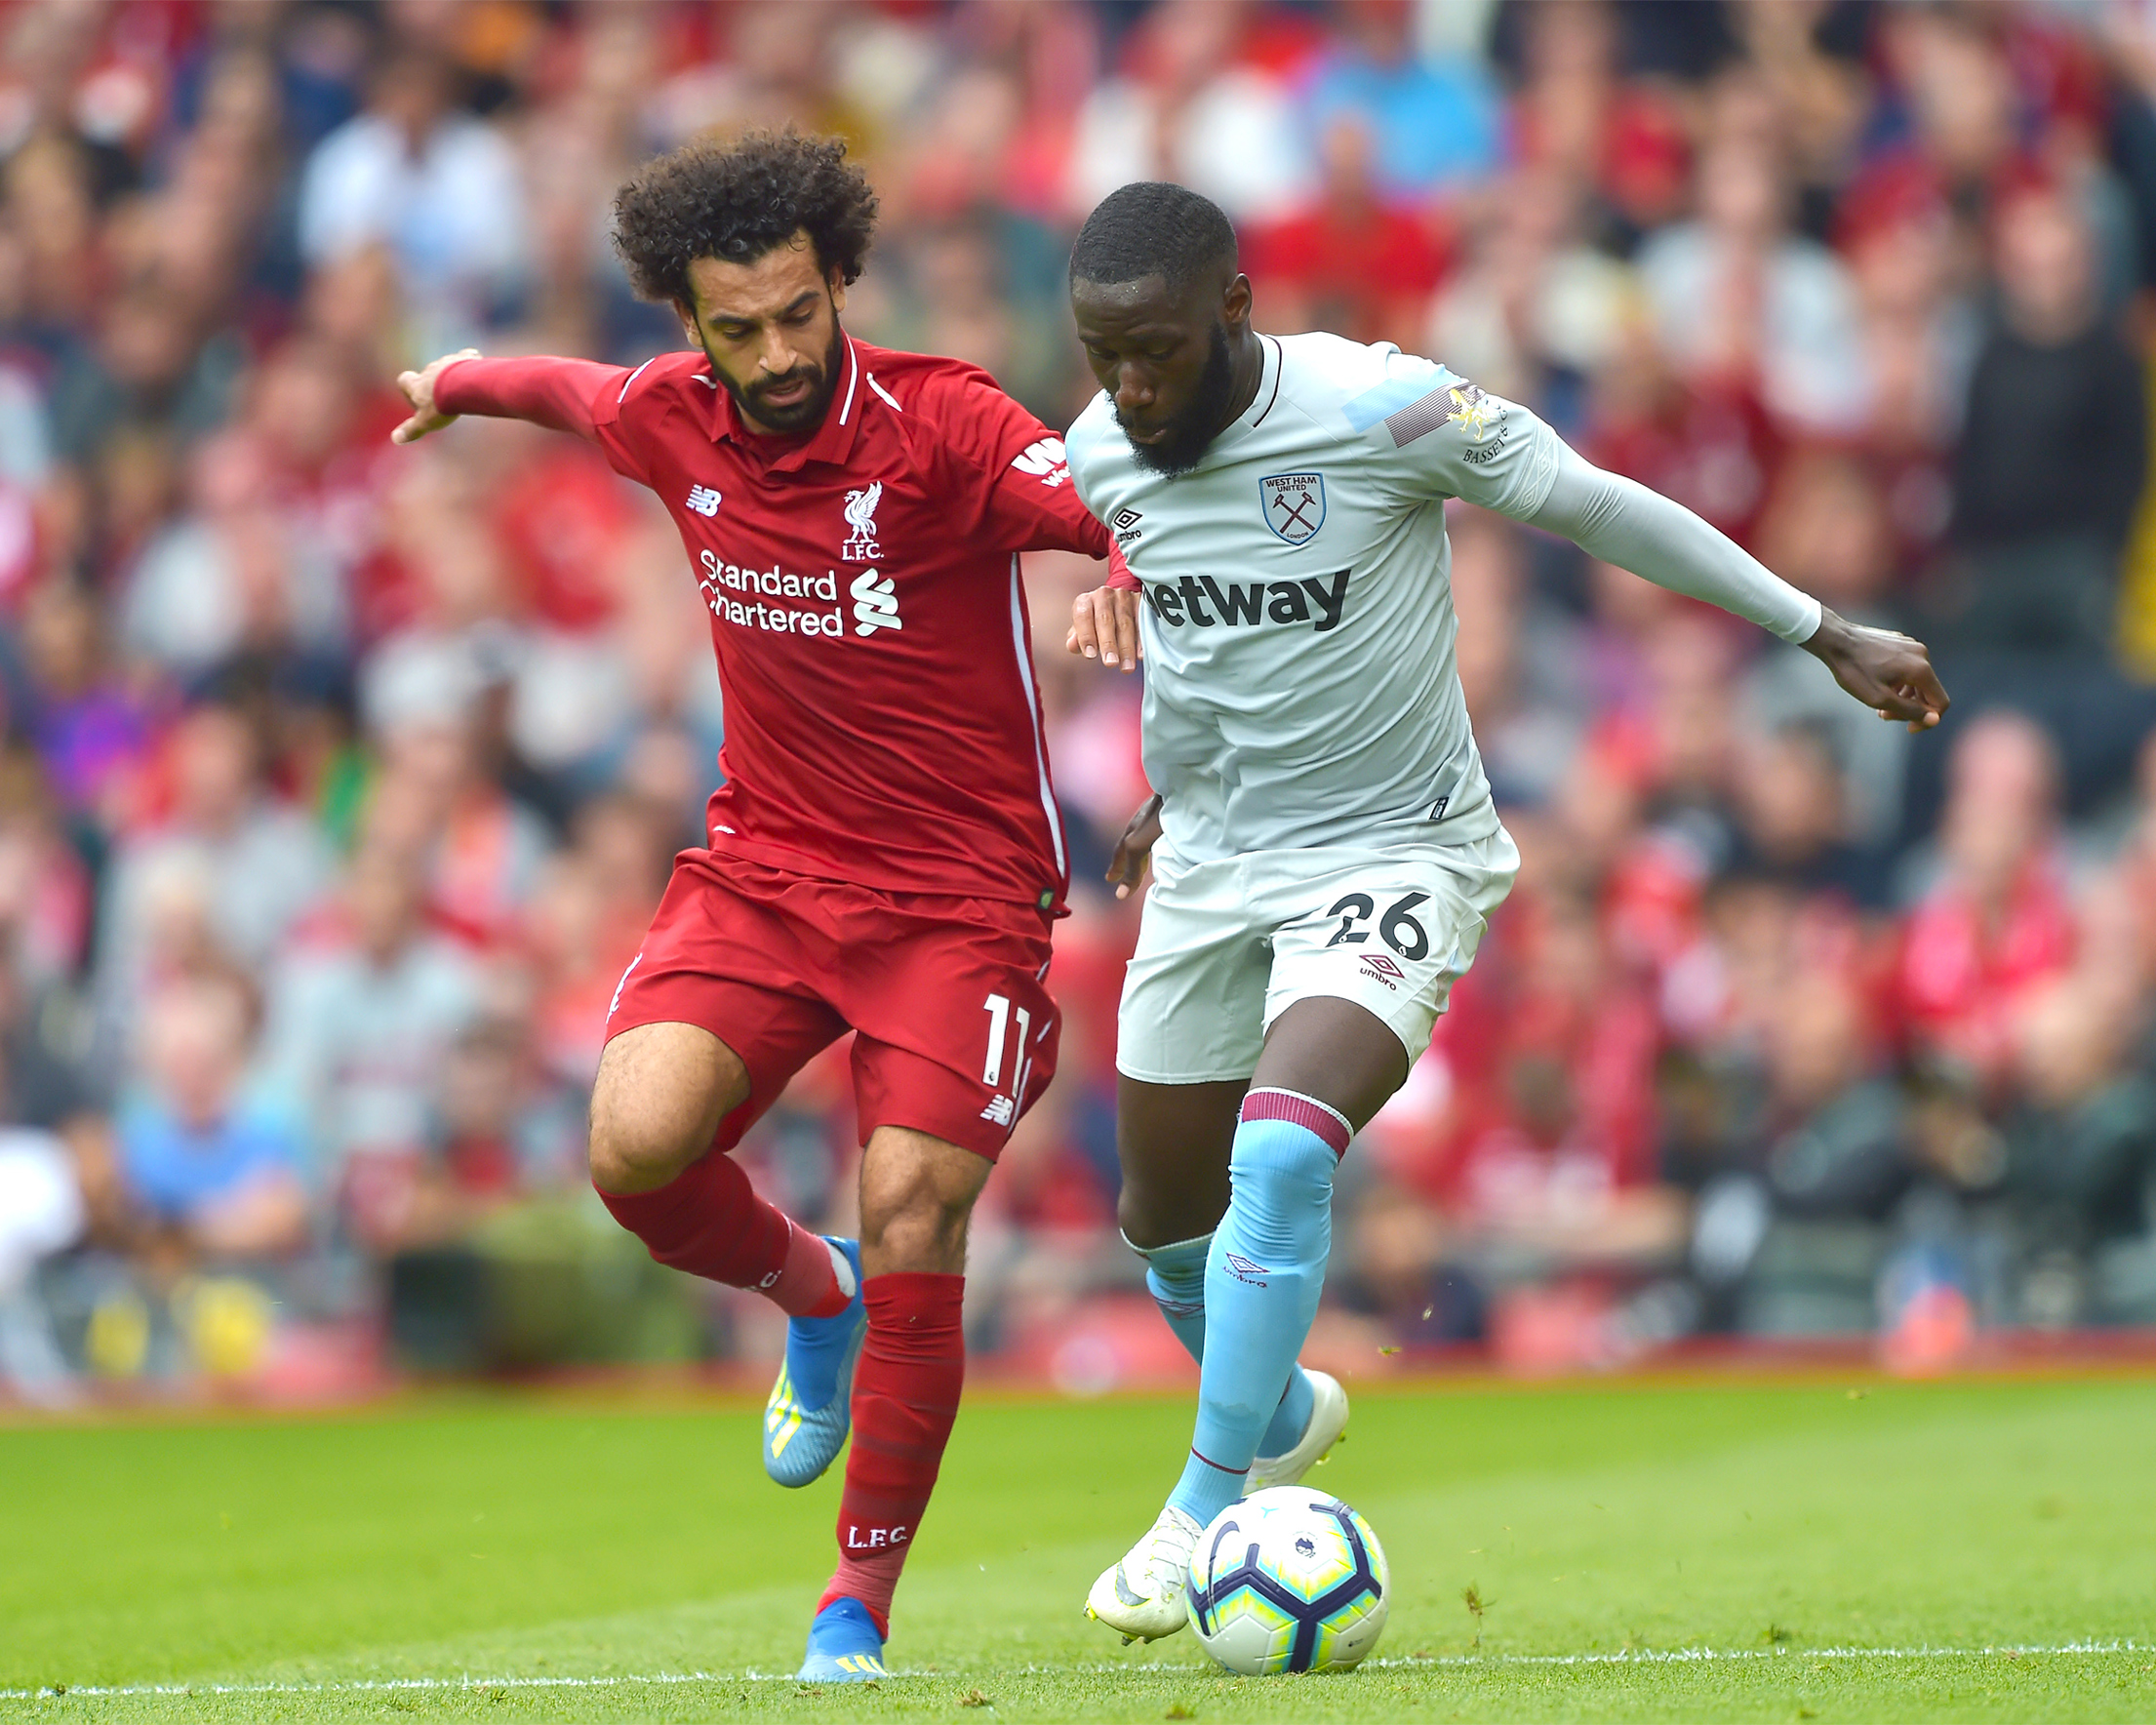 A photo showing Mohamed Salah of Liverpool battling with Arthur Masuaku of West Ham United during the Premier League debut on August 12, 2018 in Liverpool, United Kingdom.